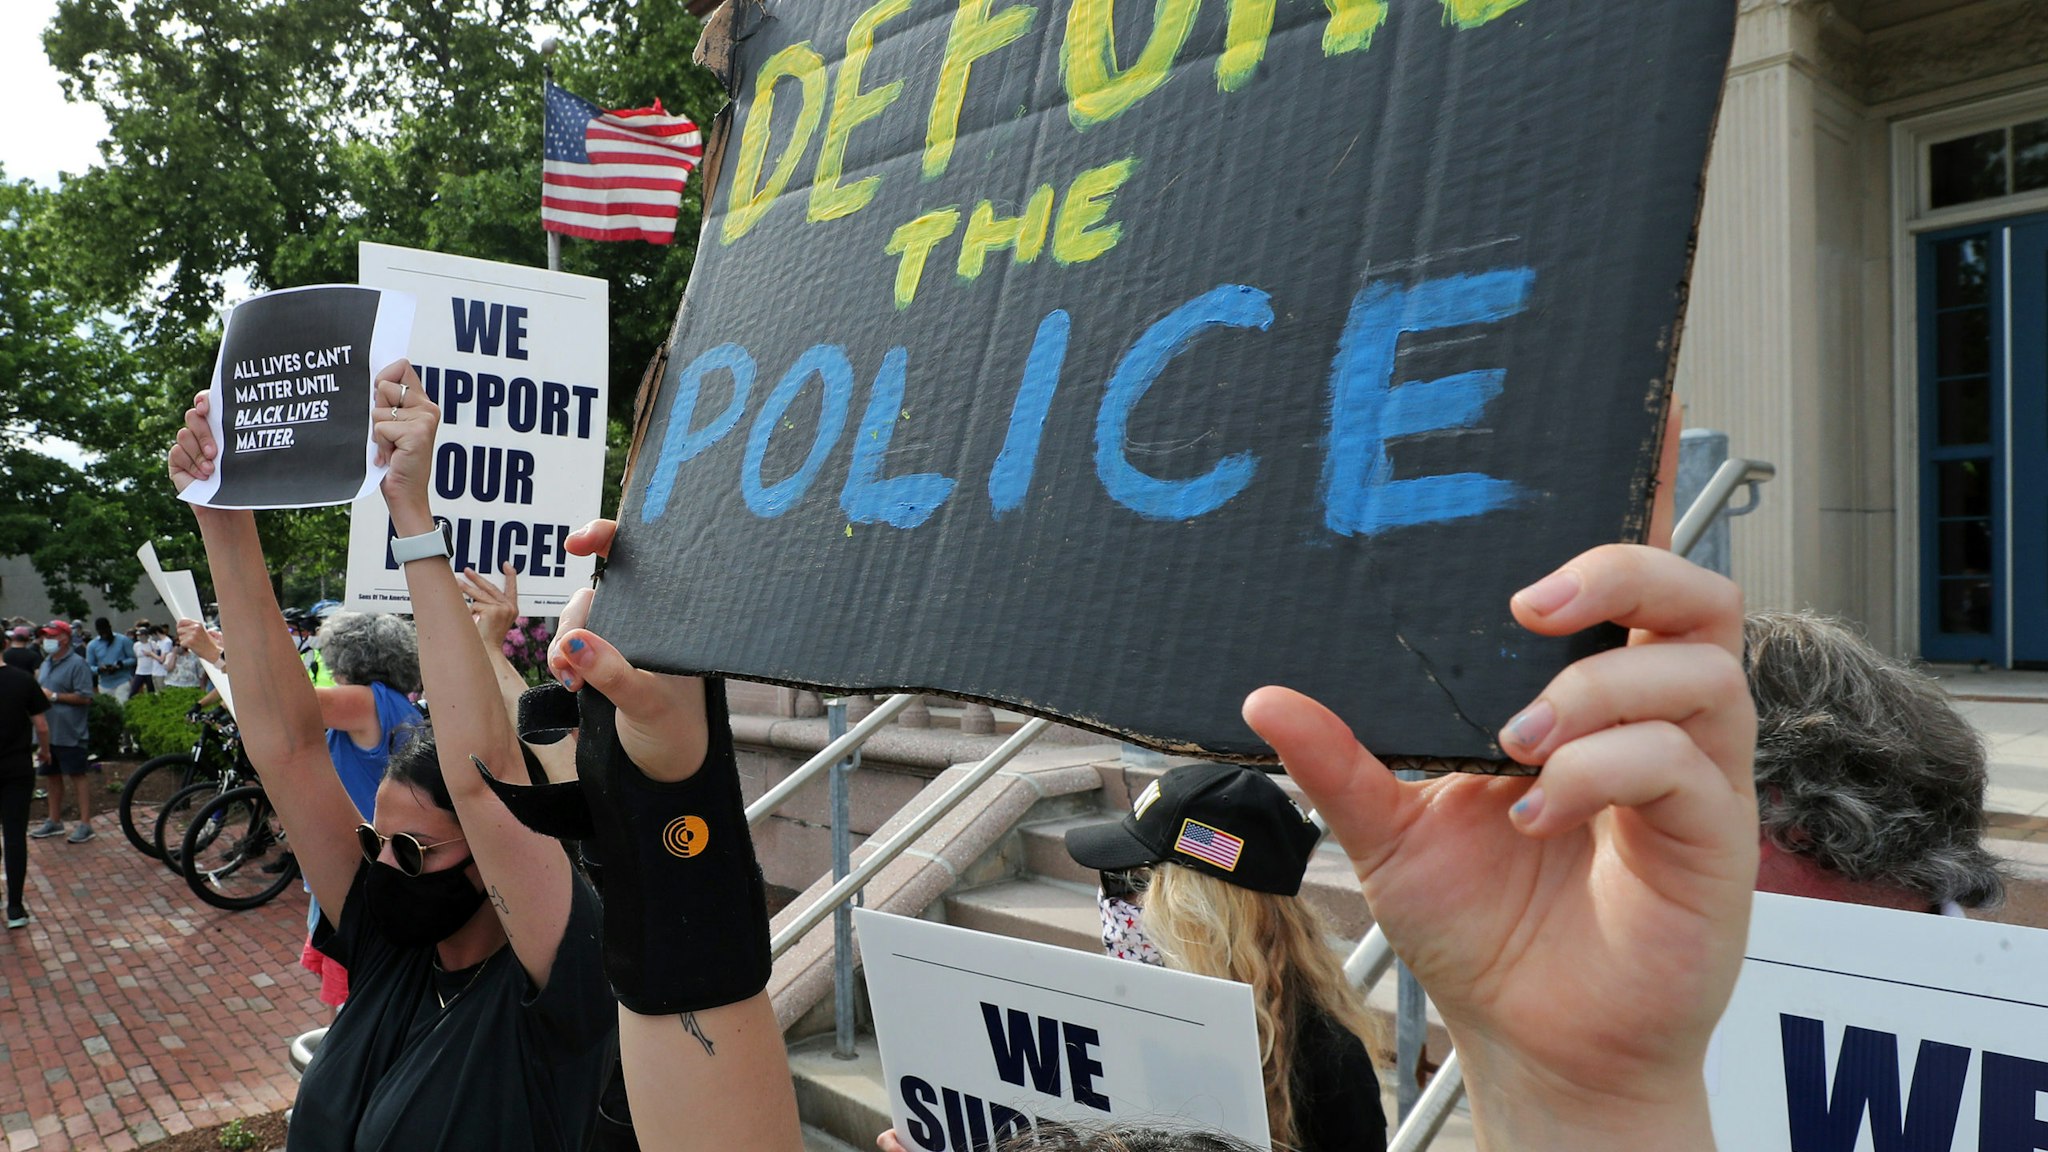 BOSTON, MA - JUNE 4: A person holding a sign reading "defund the police" stands next to a counter protester holding a "we support our police sign" in front of the Newton Police Headquarters in Newton, MA on June 4, 2020. Protesters gather and march calling for justice for George Floyd and other Black Americans killed by police officers on the day of Floyd's funeral. (Photo by Jim Davis/The Boston Globe via Getty Images)